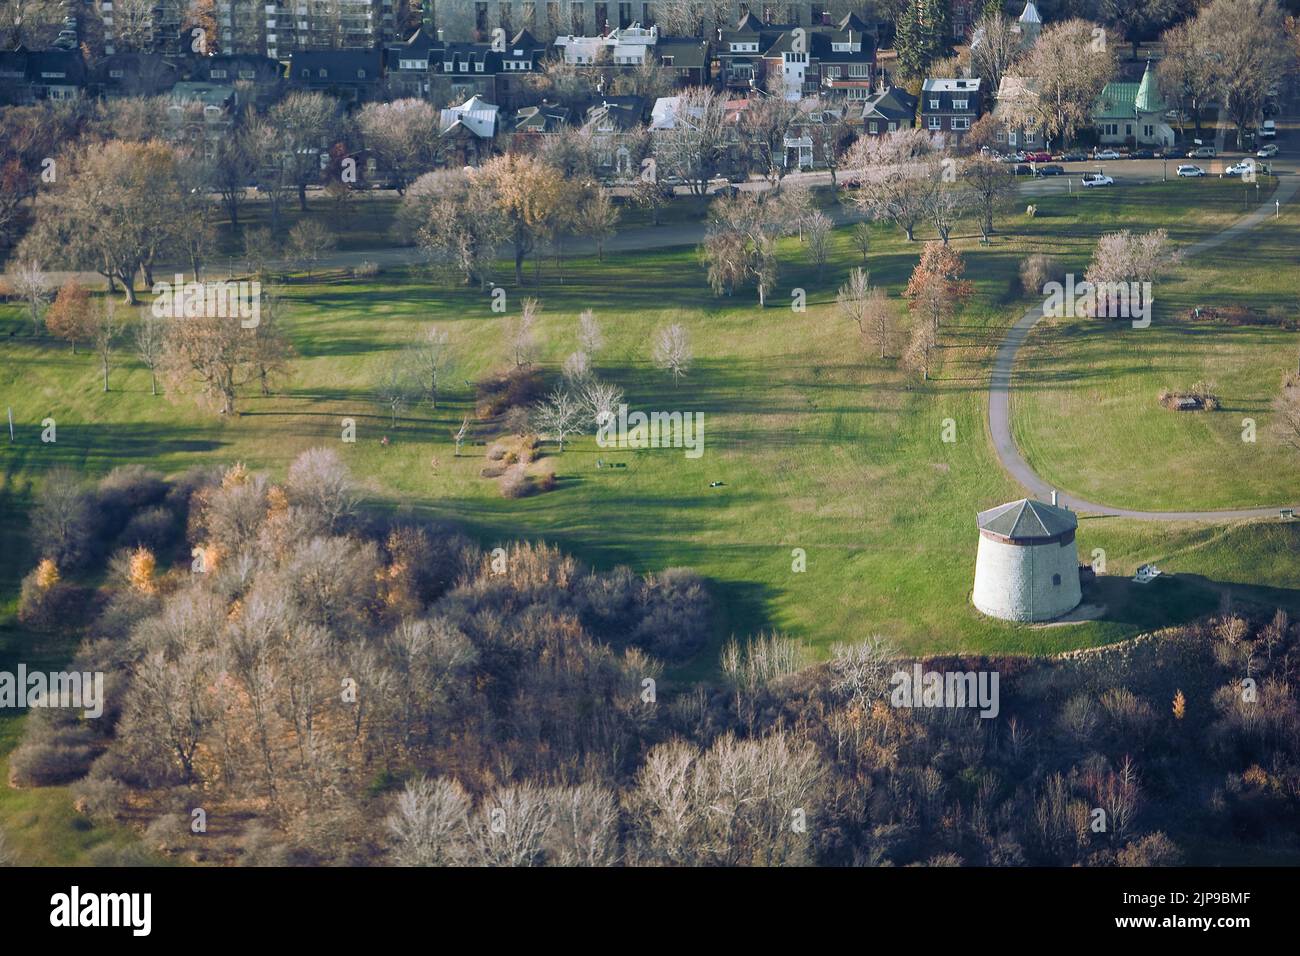 The Plains of Abraham in Quebec city are pictured in this aerial photo November 11, 2009. The Plains of Abraham is a historic area within The Battlefields Park in Quebec City. Stock Photo